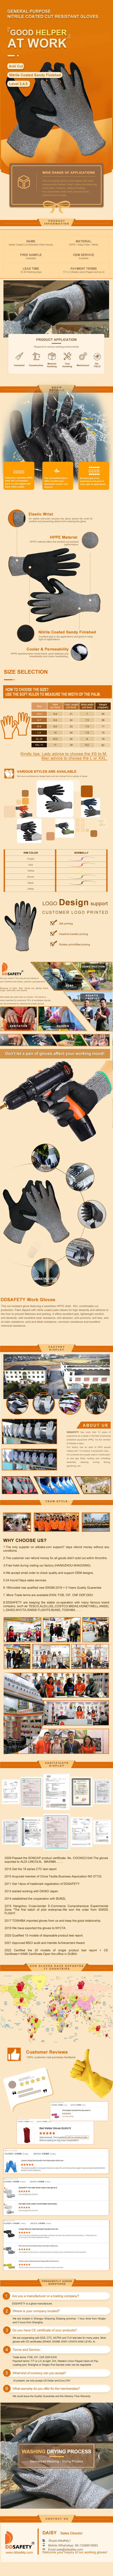 Safety Work Gloves for Hand Protection - DCR440 Safety Work Gloves for Hand Protection - DCR440 gloves,safety work gloves,safety gloves,work gloves